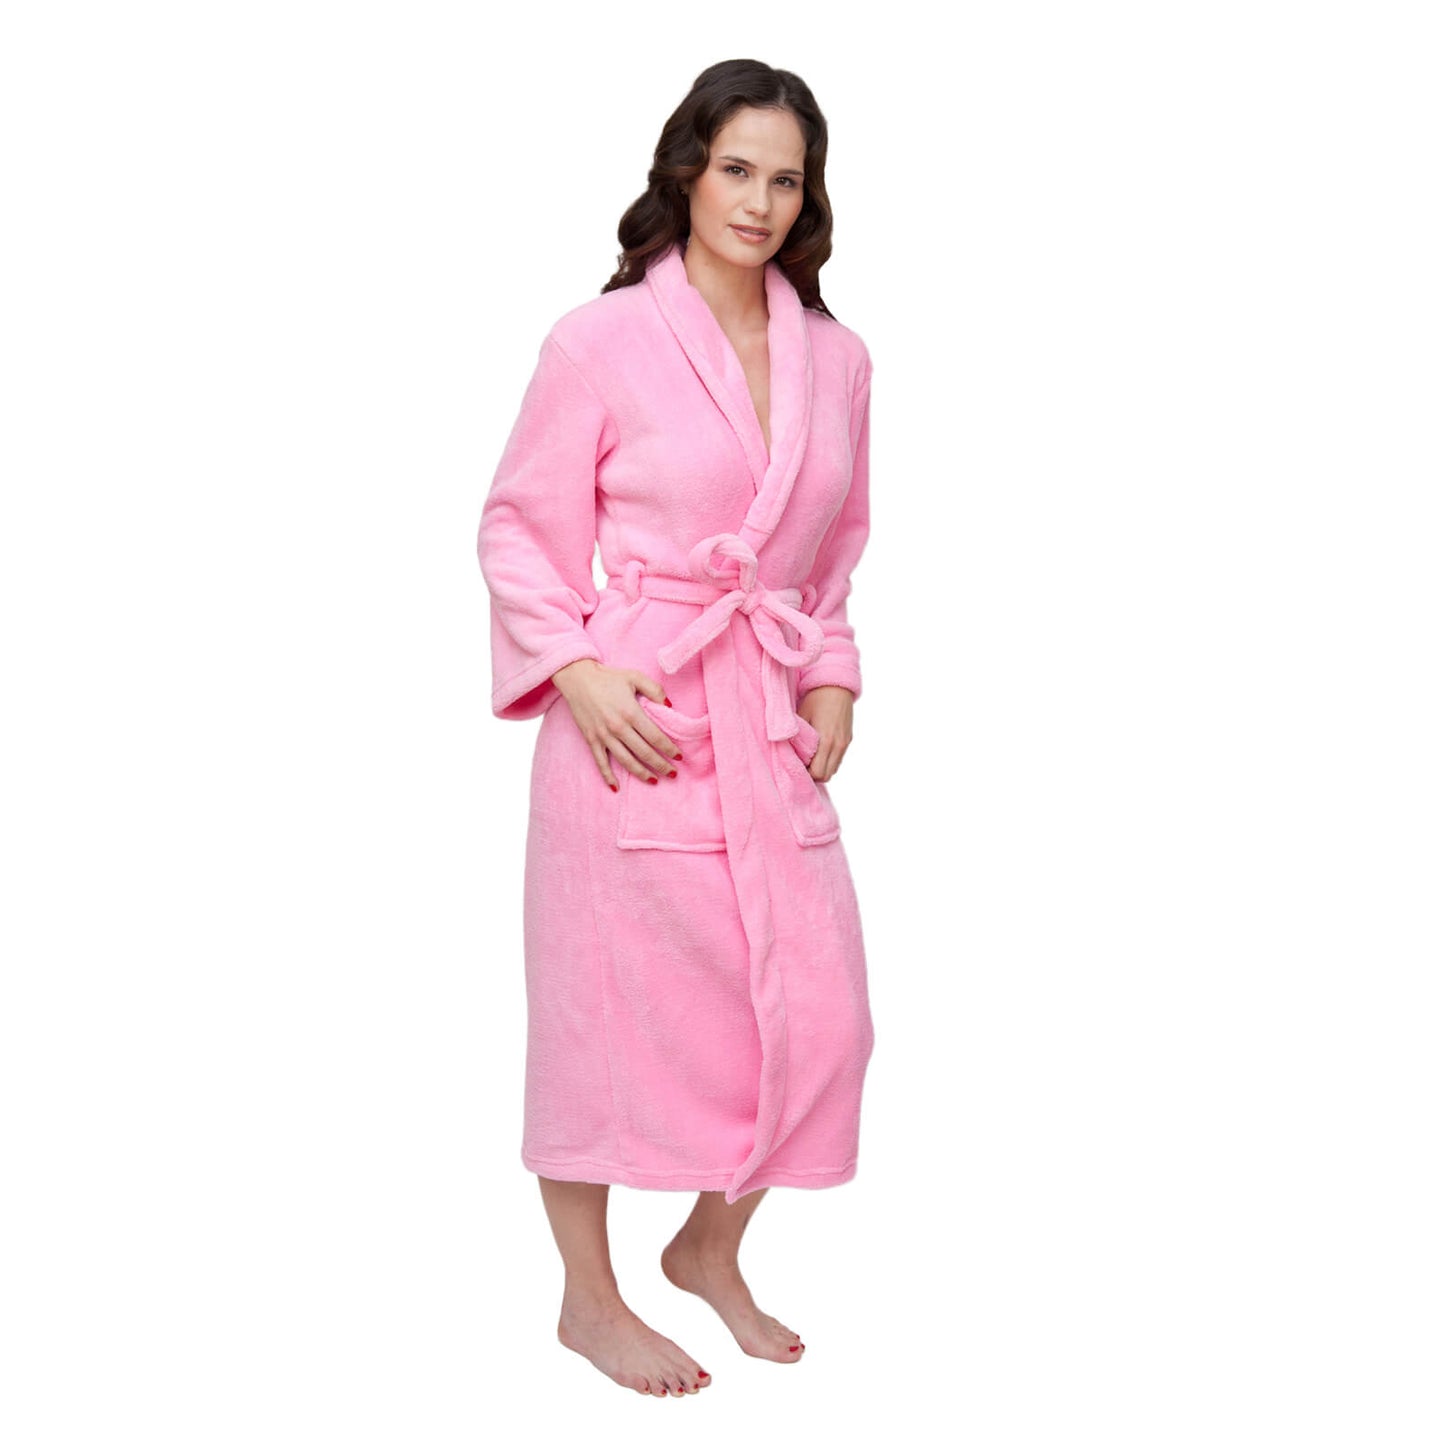 Robes for the Bridal Party